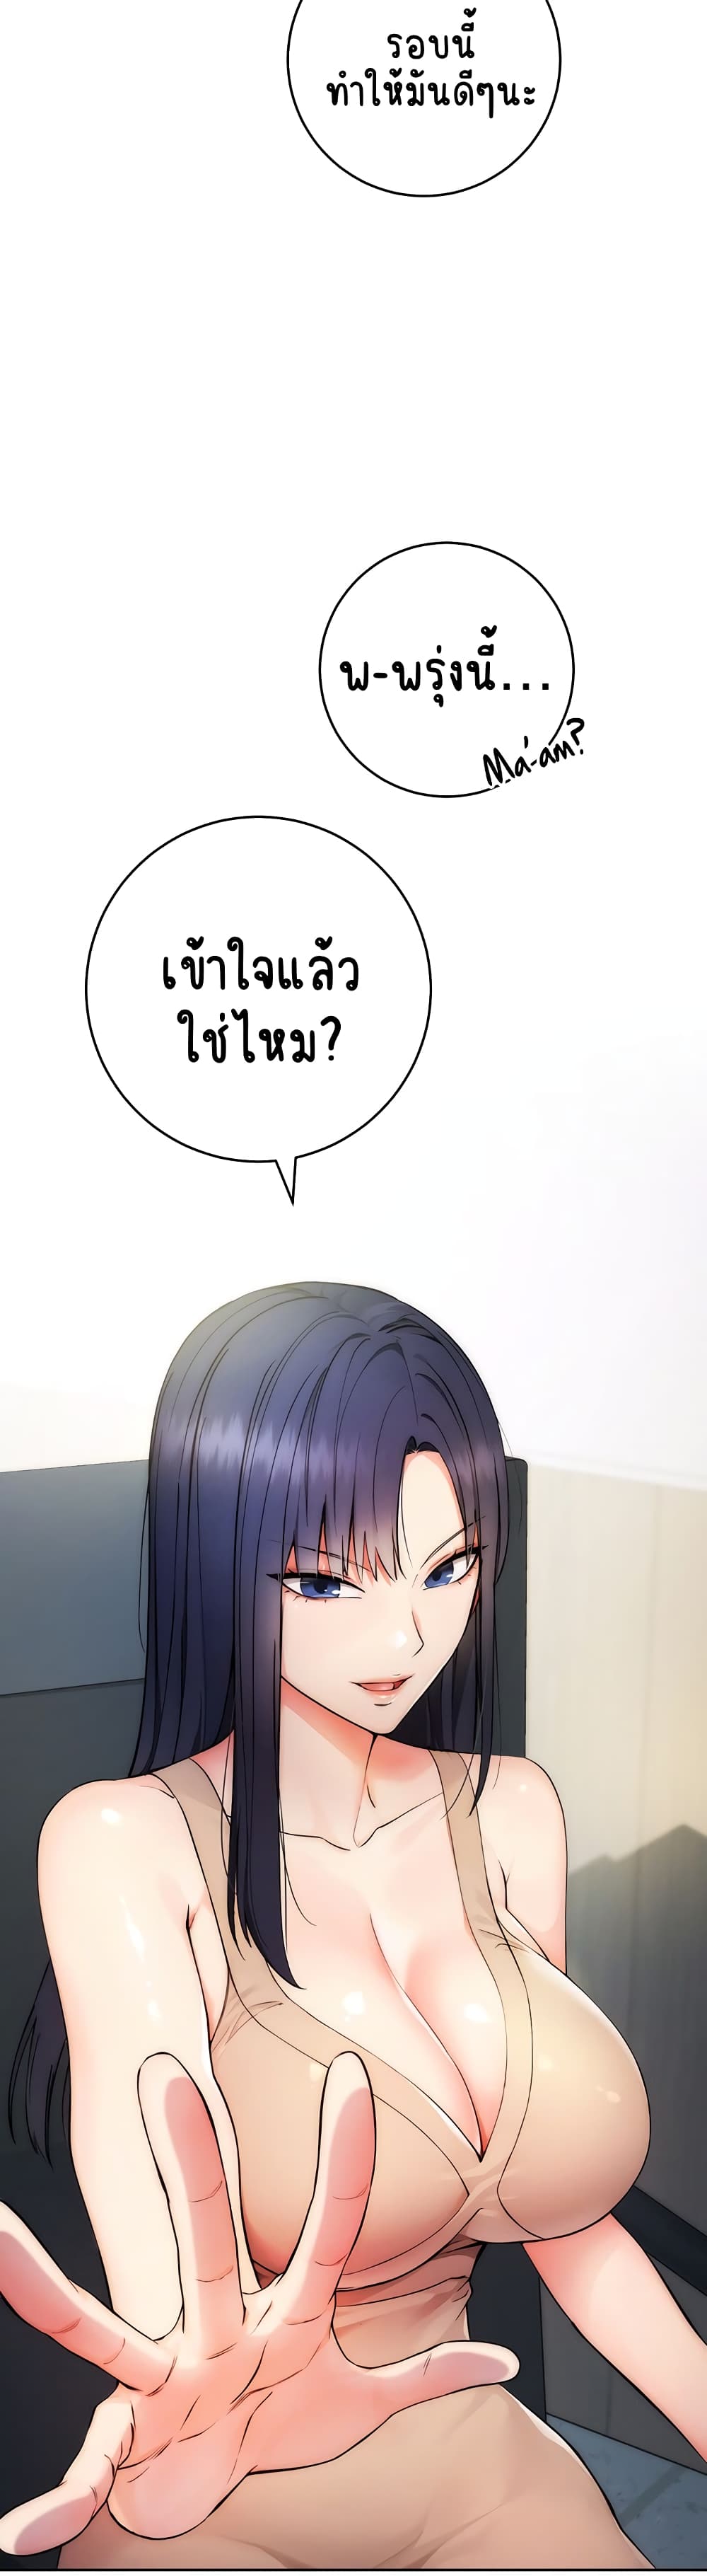 Outsider: The Invisible Man ตอนที่ 1 ภาพ 27